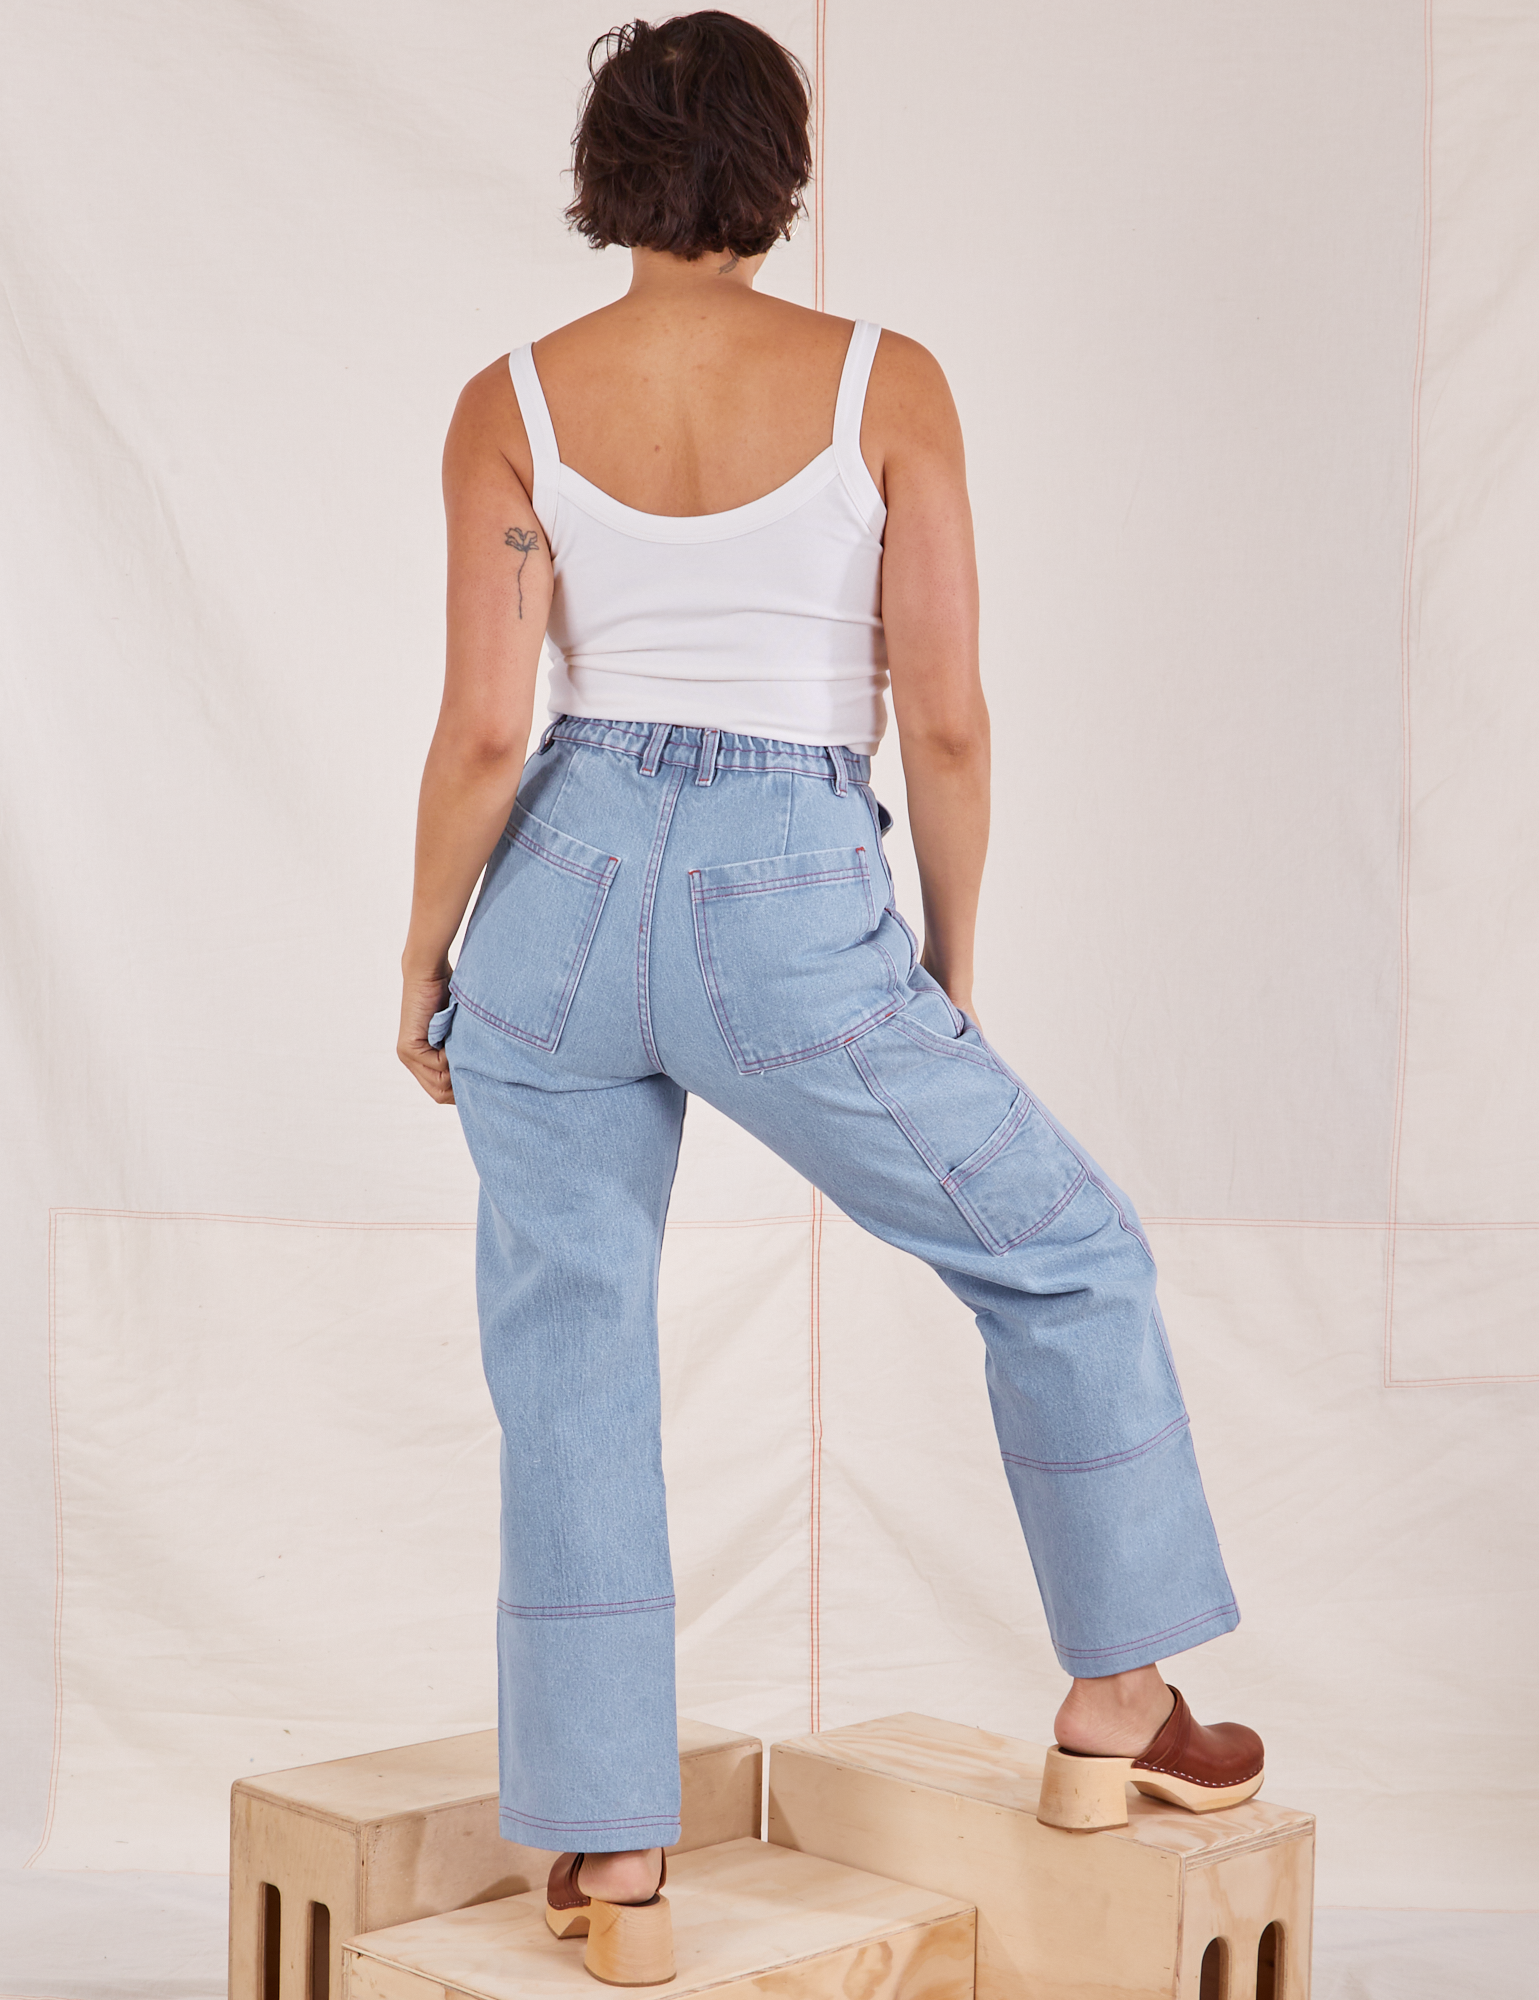 Back view of Carpenter Jeans in Light Wash and Cropped Cami in vintage tee off-white worn by Tiara